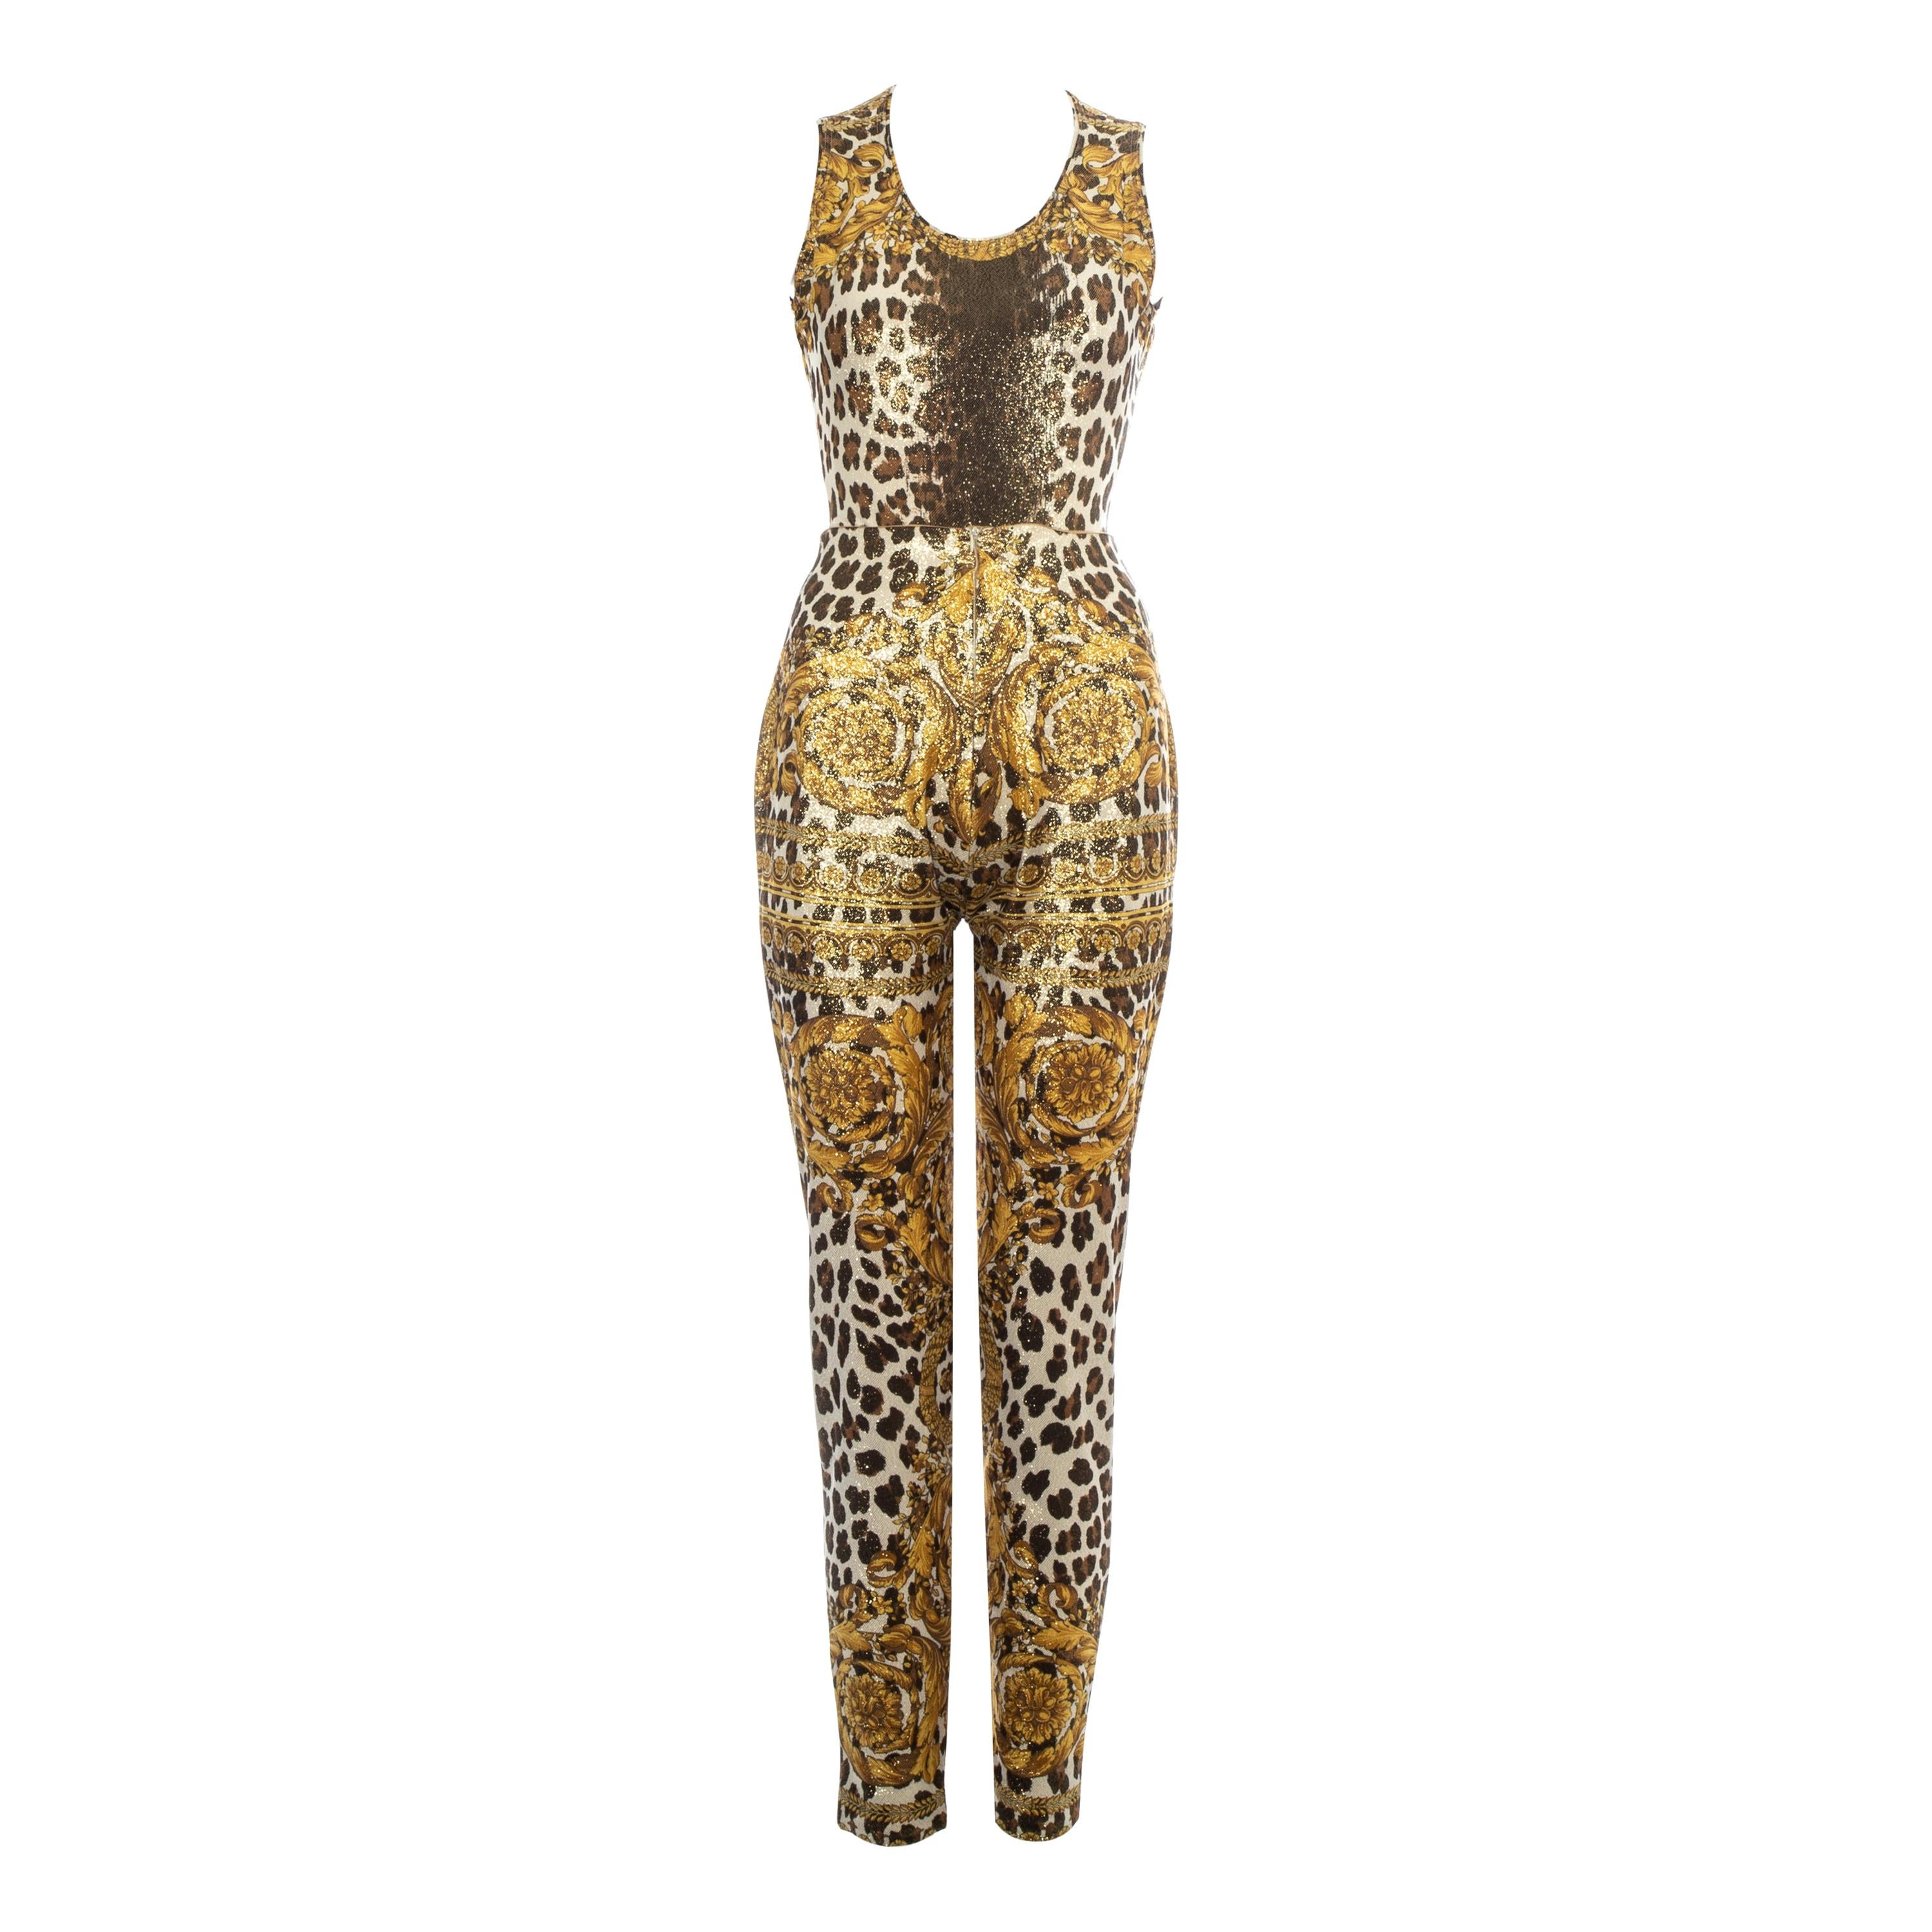 Gianni Versace gold leopard printed bodysuit and pants, ss 1992 For Sale